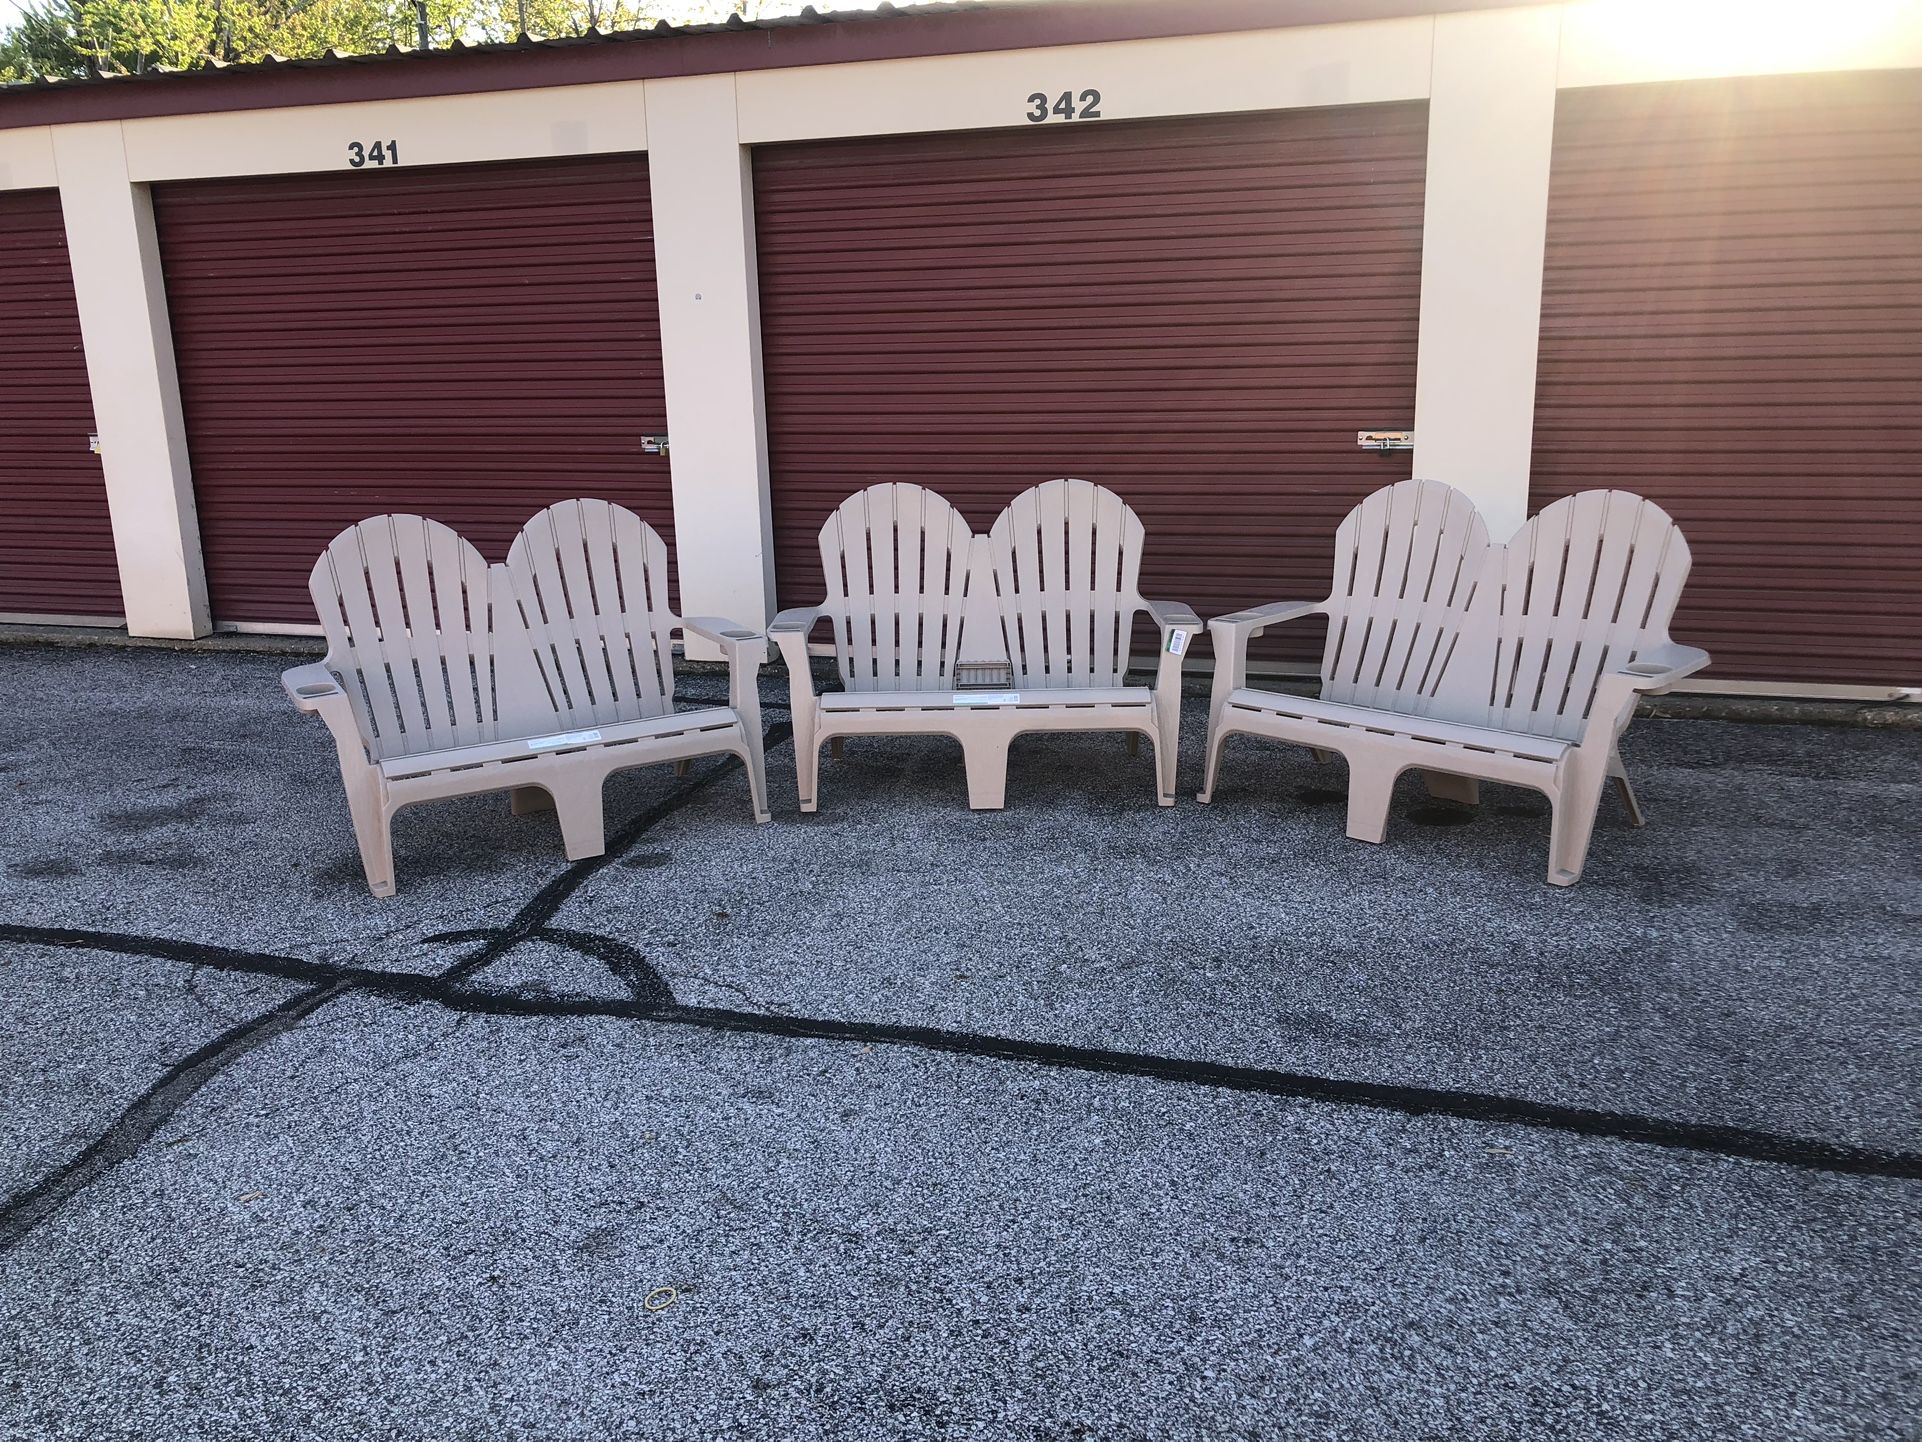 New - Never Used Summer chairs 